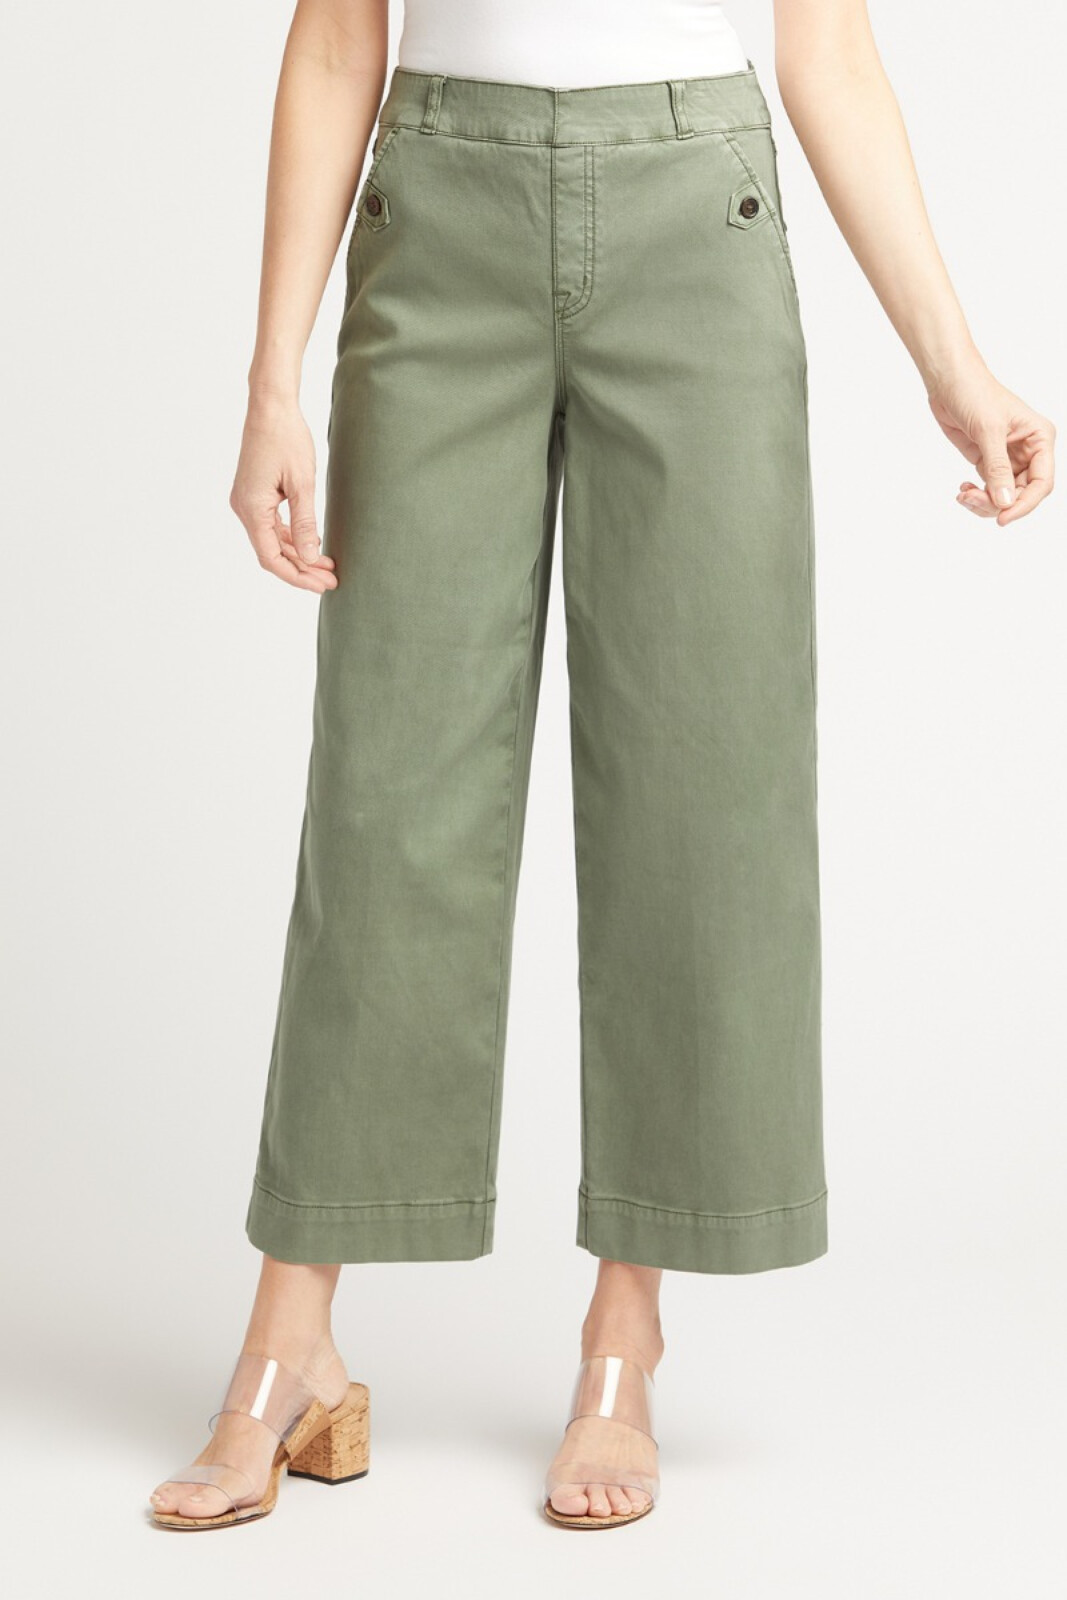 Spanx Stretch Twill Cropped Wide Leg Pant in Mauve – Brown Bird